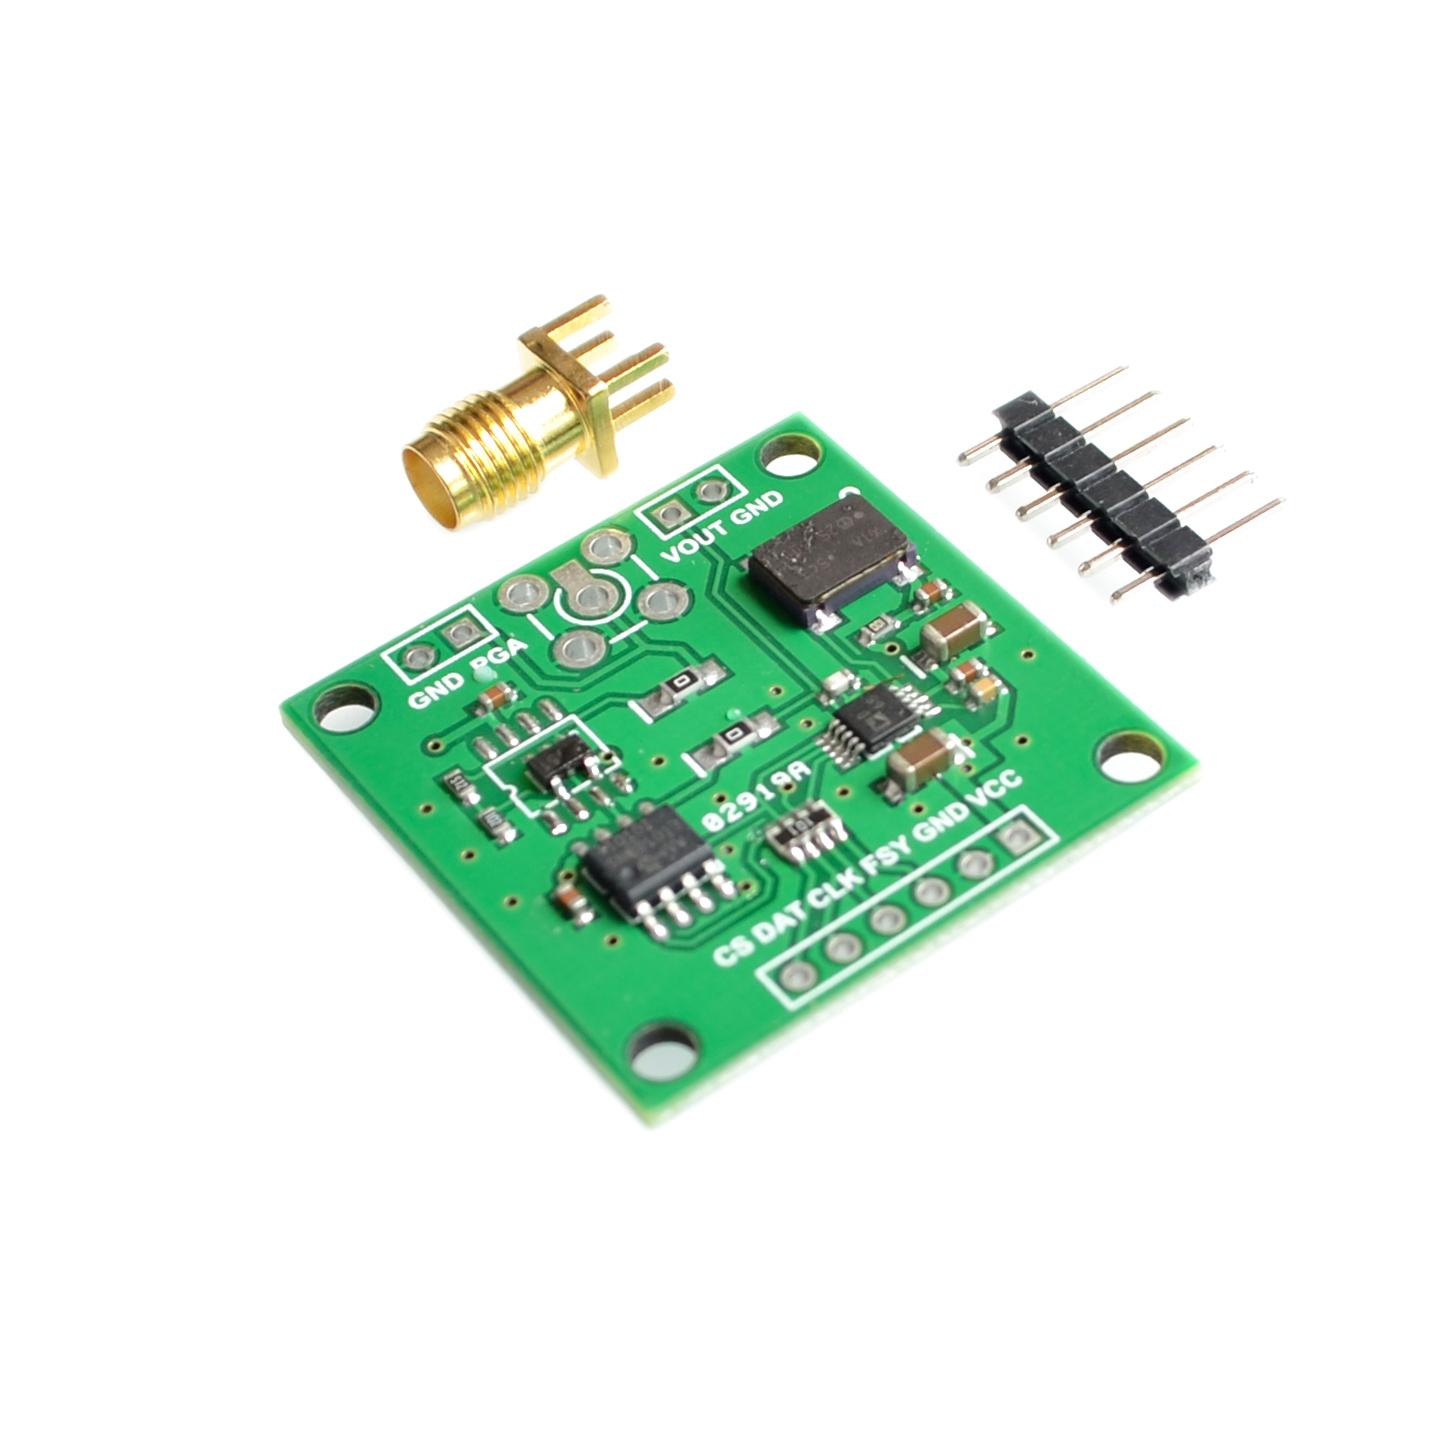 AD9833 triangle sine wave signal source IC integrated circuit square wave generator module